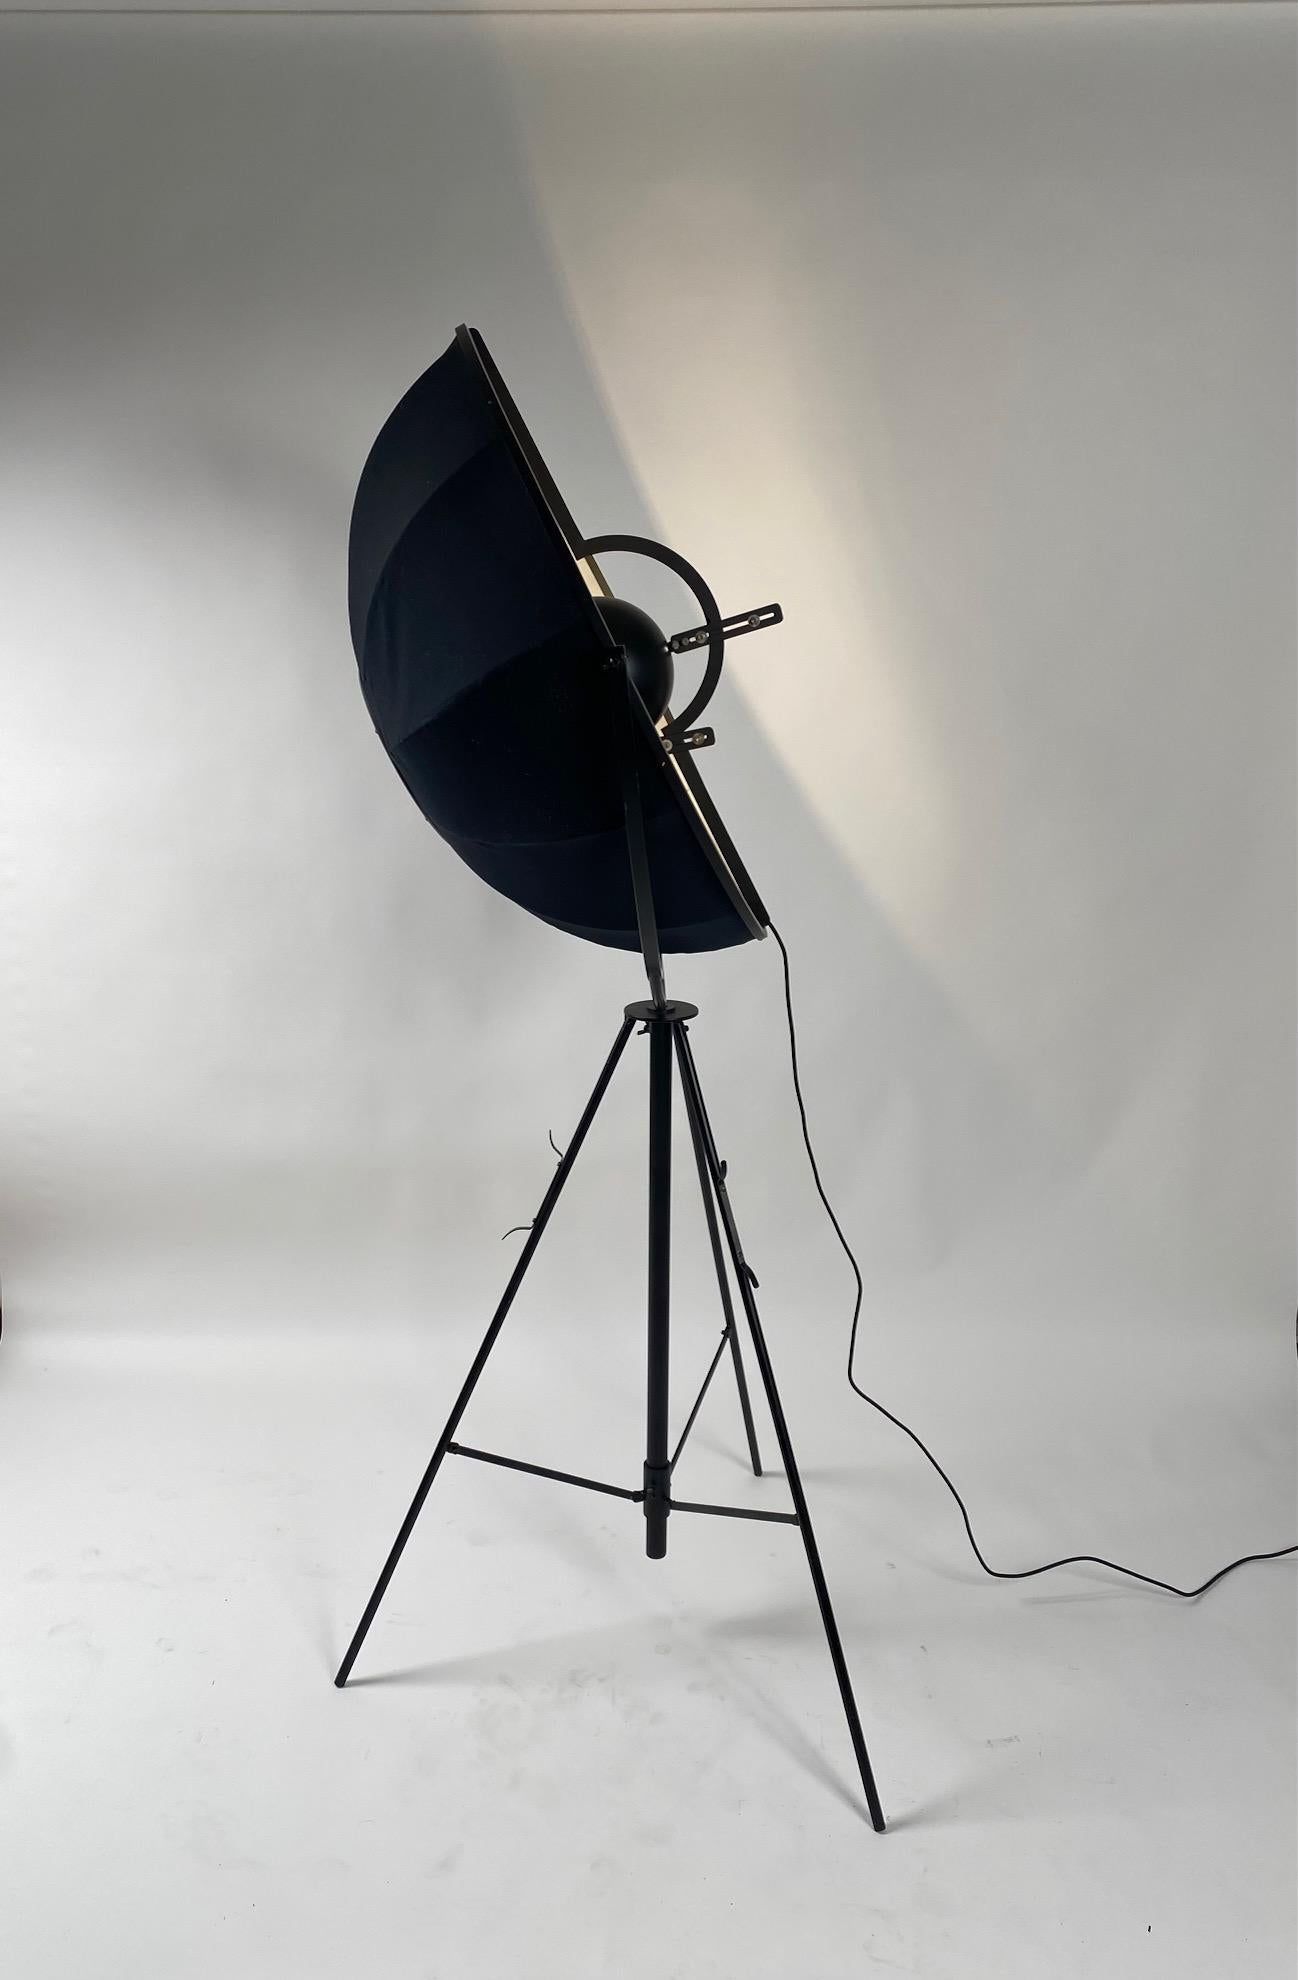 Authentic 1980s version of the Italian iconic floor lamp in metal and fabric conceived by Mariano Fortuny in 1907.
The broad adjustable shade and tripod base aim comfortably diffused indirect light, while an interior reflector hides the bulb (or